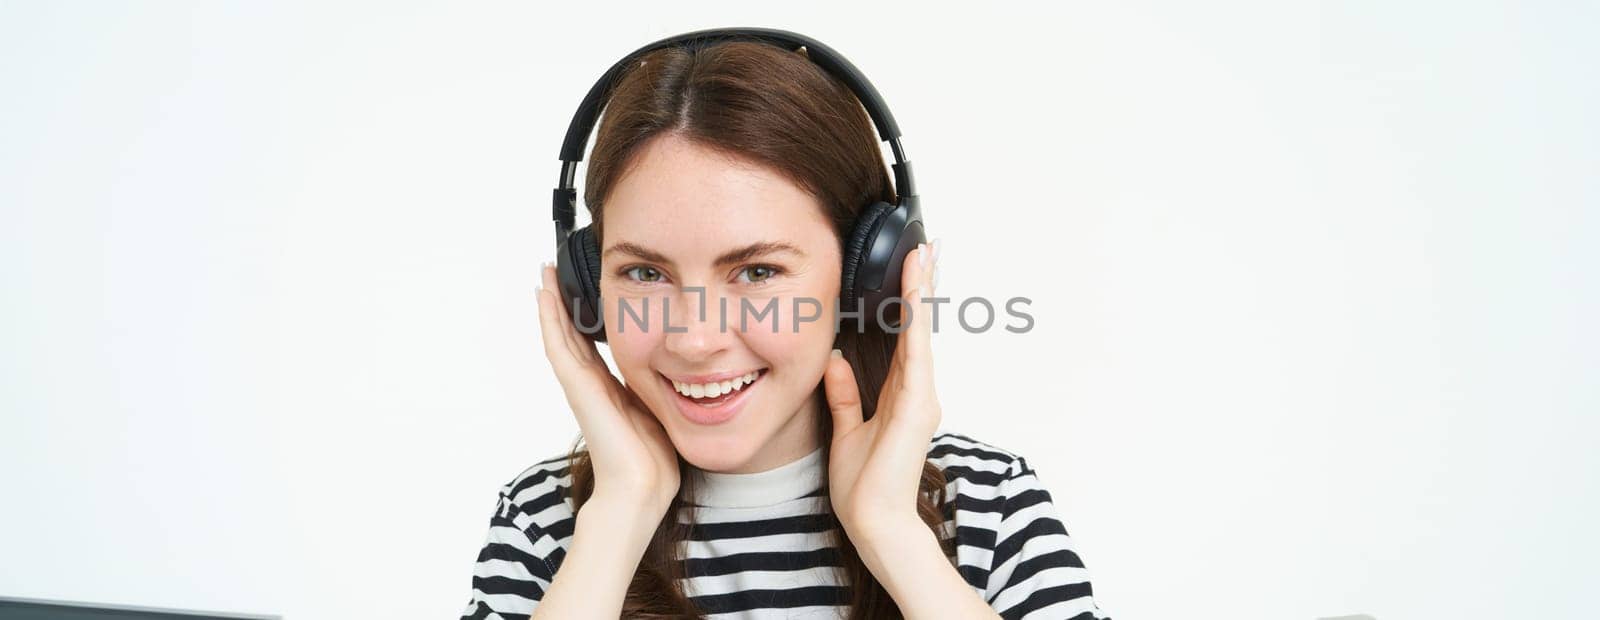 Portrait of woman, smiling, wearing wireless headphones, listening music, studying in earphones, standing isolated over white background.